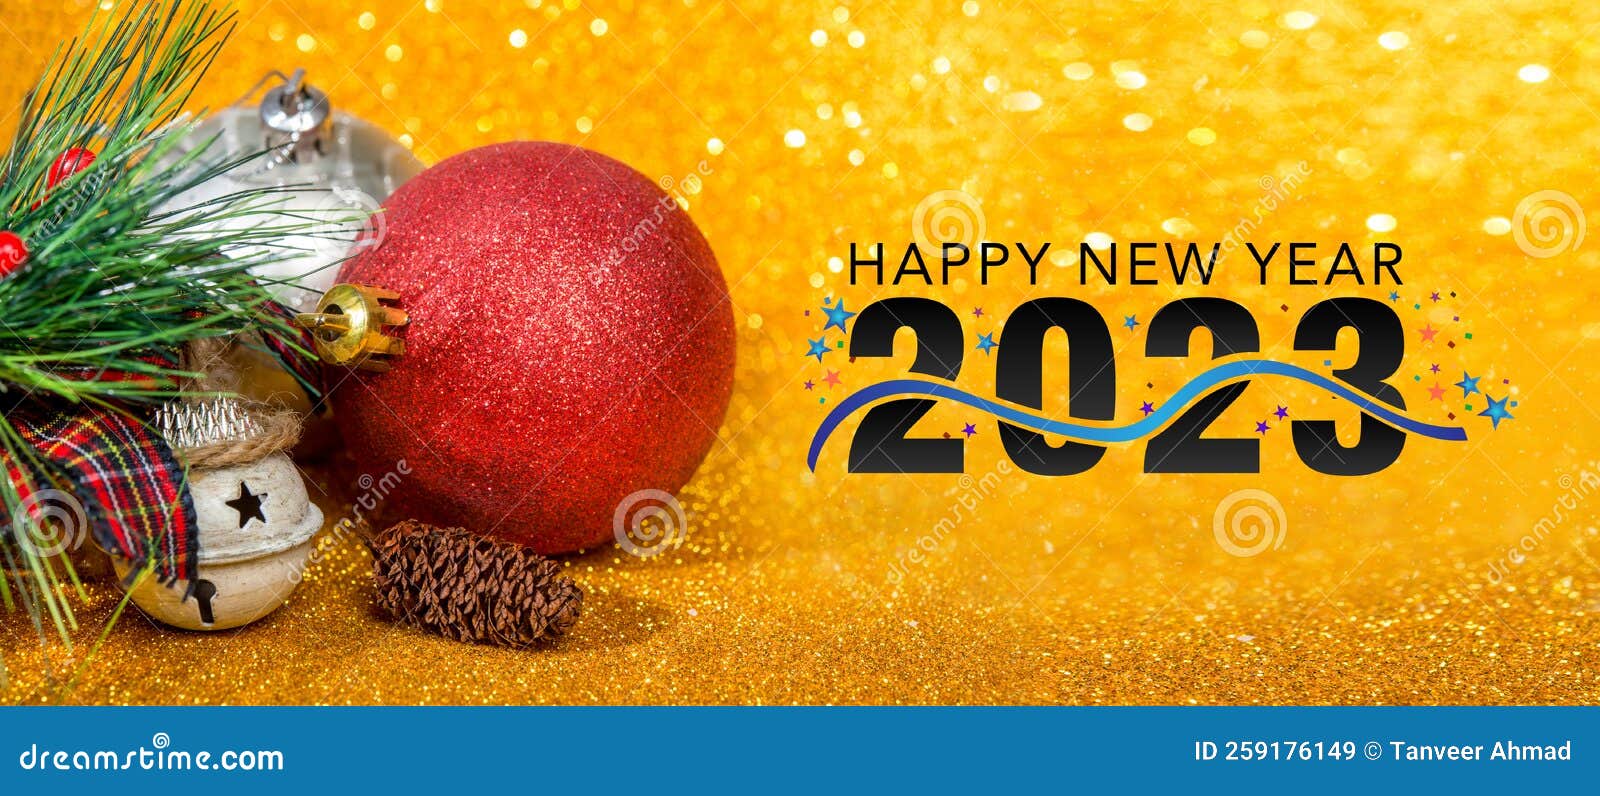 Happy New Year 2023 Celebration Banner with Glitter Background and ...